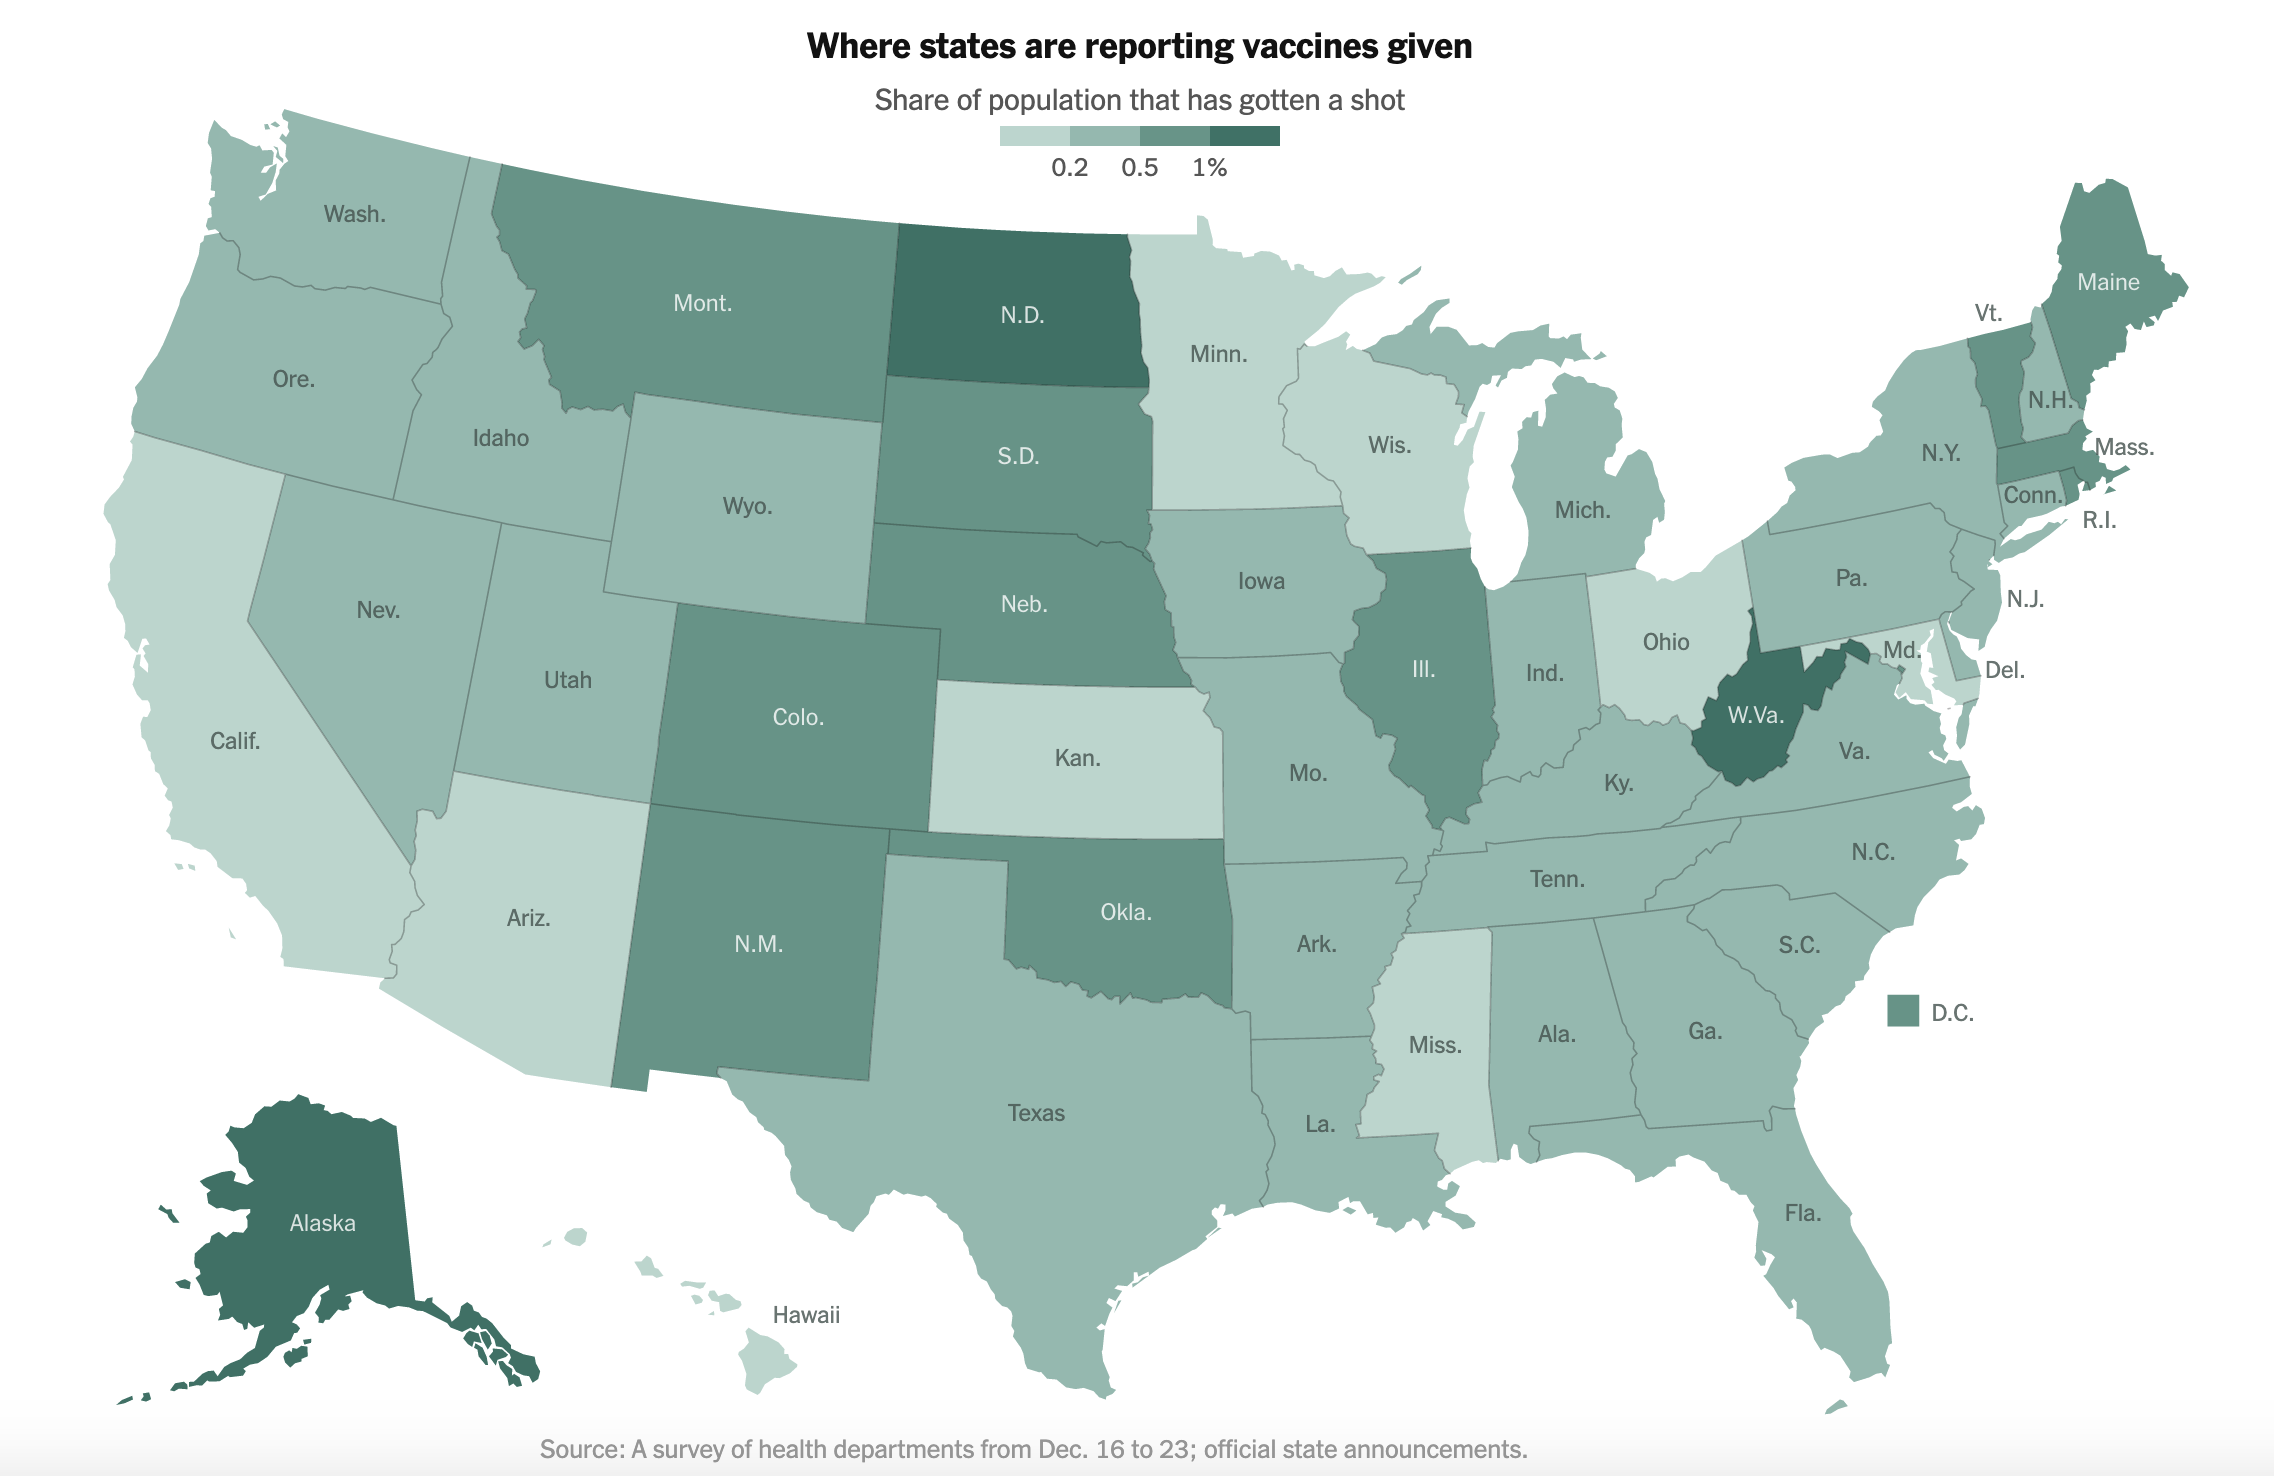 https://ghost.helloskip.com/blog/content/images/2020/12/Vaccine-Distribution-By-State.png